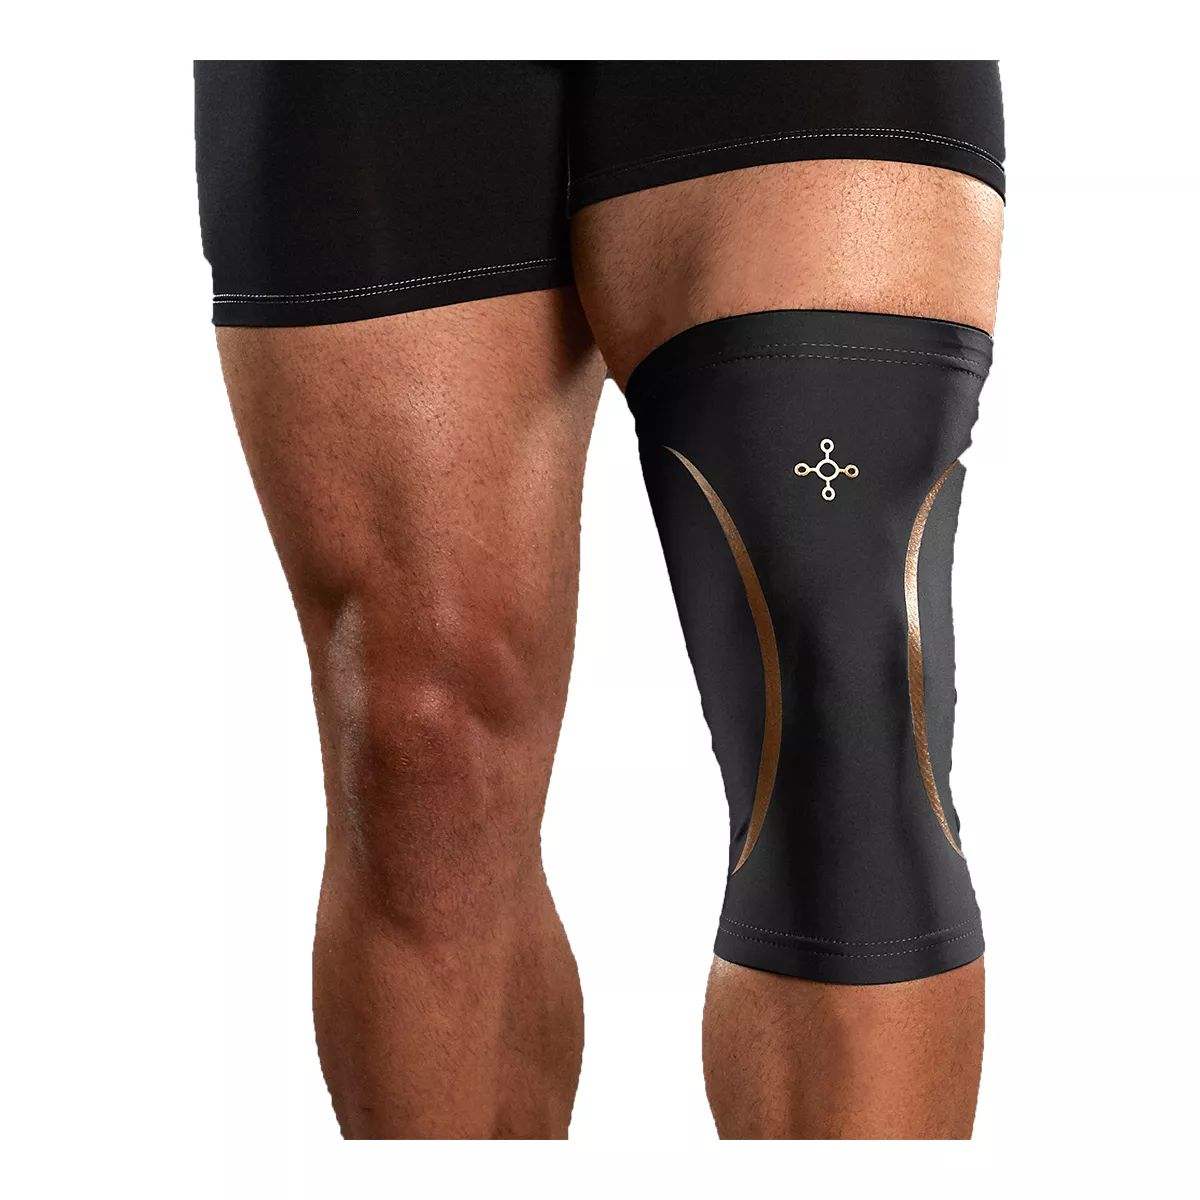 Tommie Copper Knee Sleeve Compression Brace Core Support Pain Relief